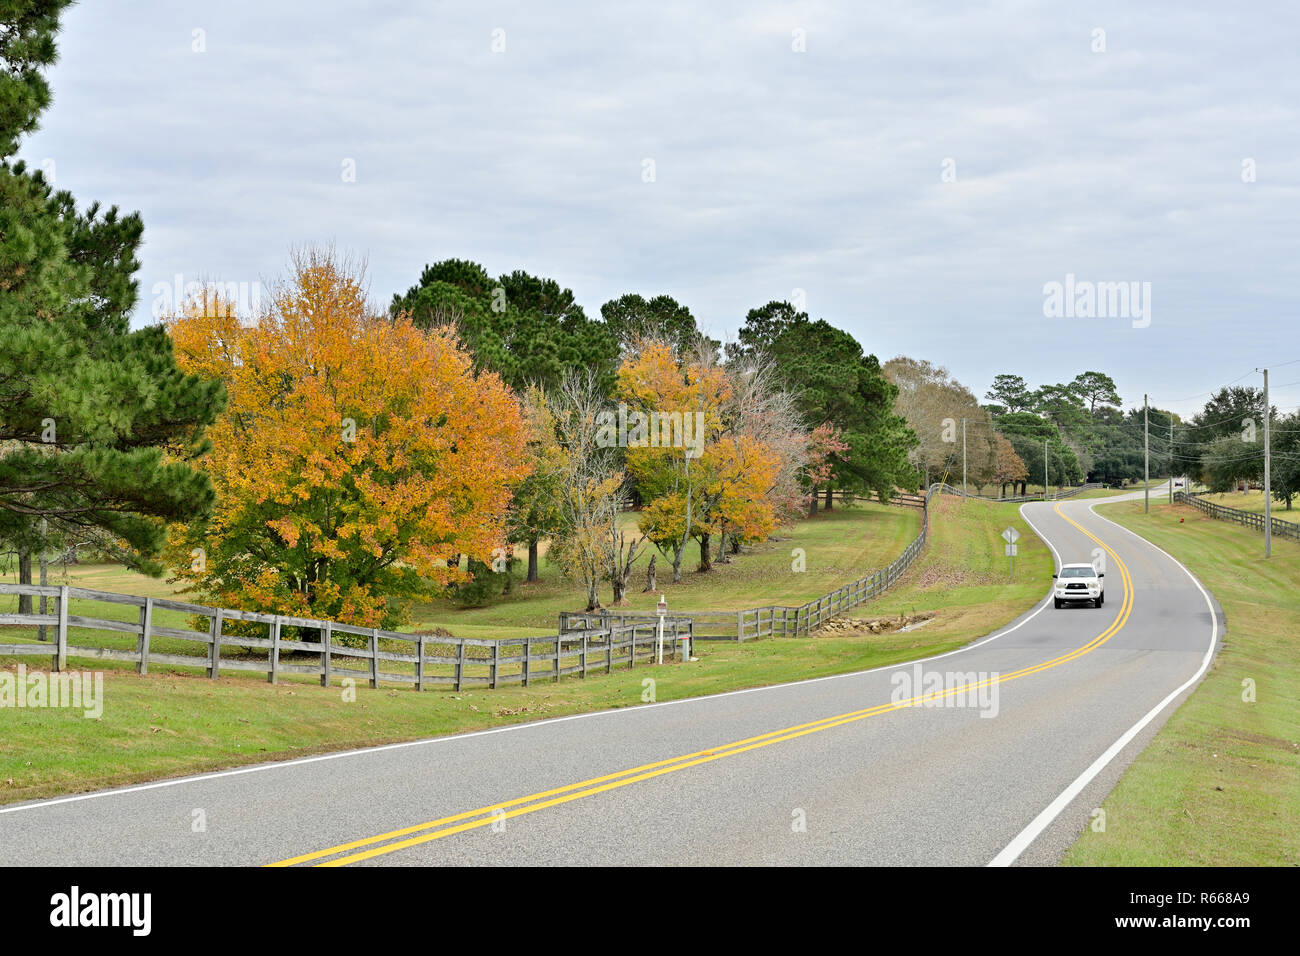 Quiet winding country road or lane with a split rail fence and trees changing into Fall colors in south Alabama, USA, with a white car approaching. Stock Photo